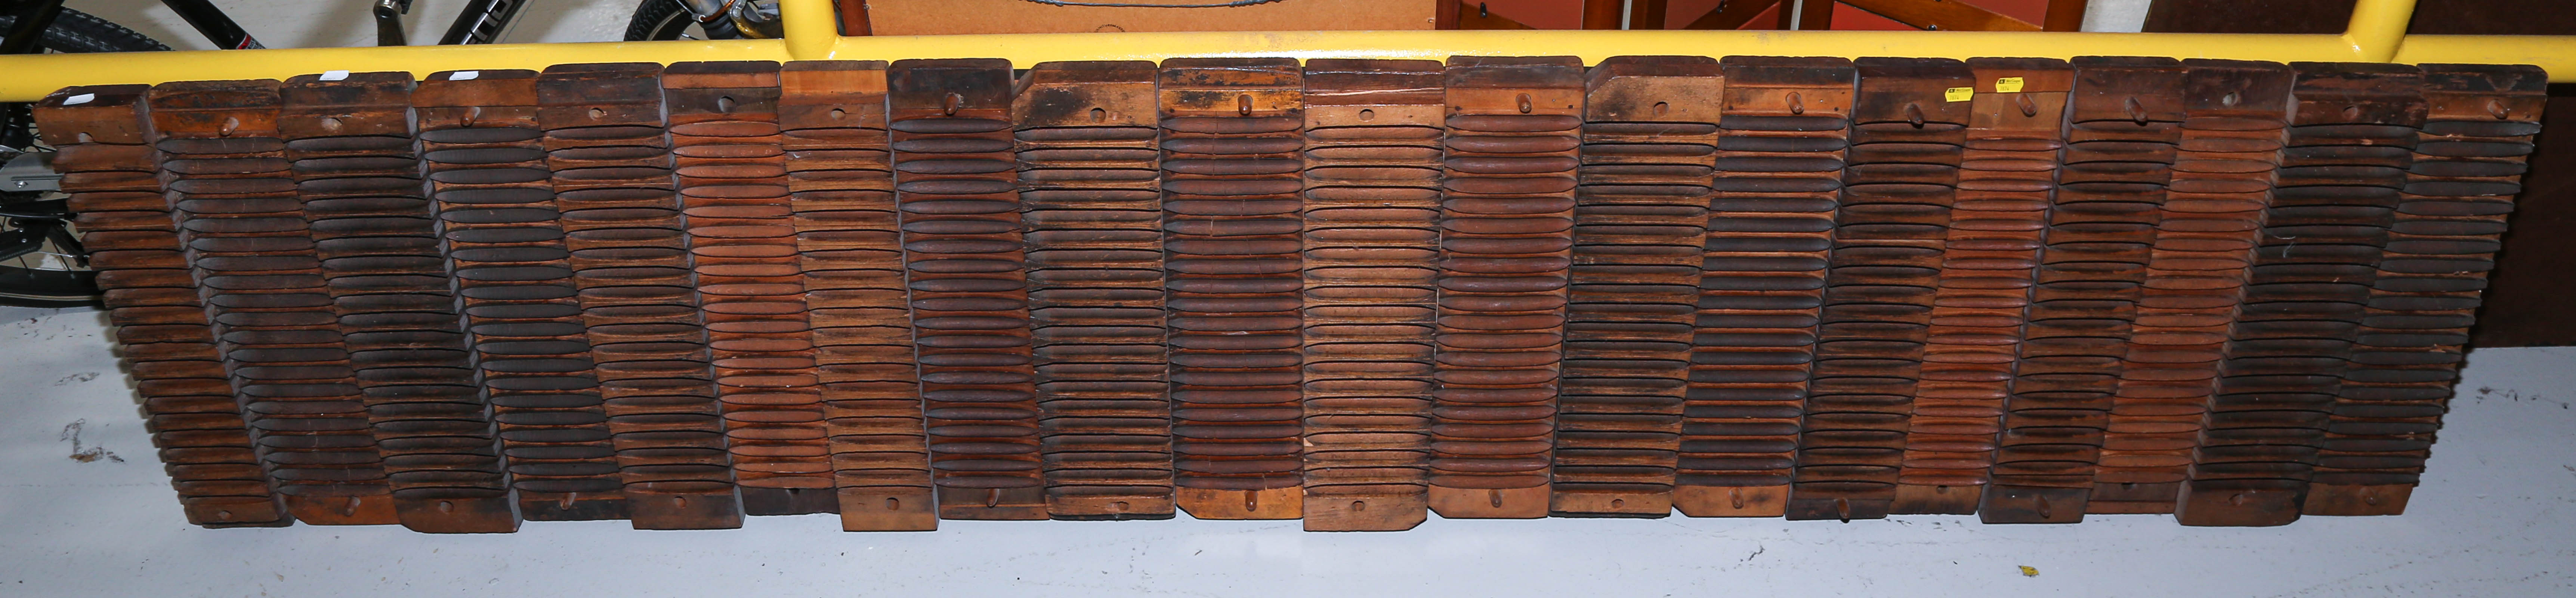 LARGE GROUP OF ANTIQUE CIGAR MOLDS